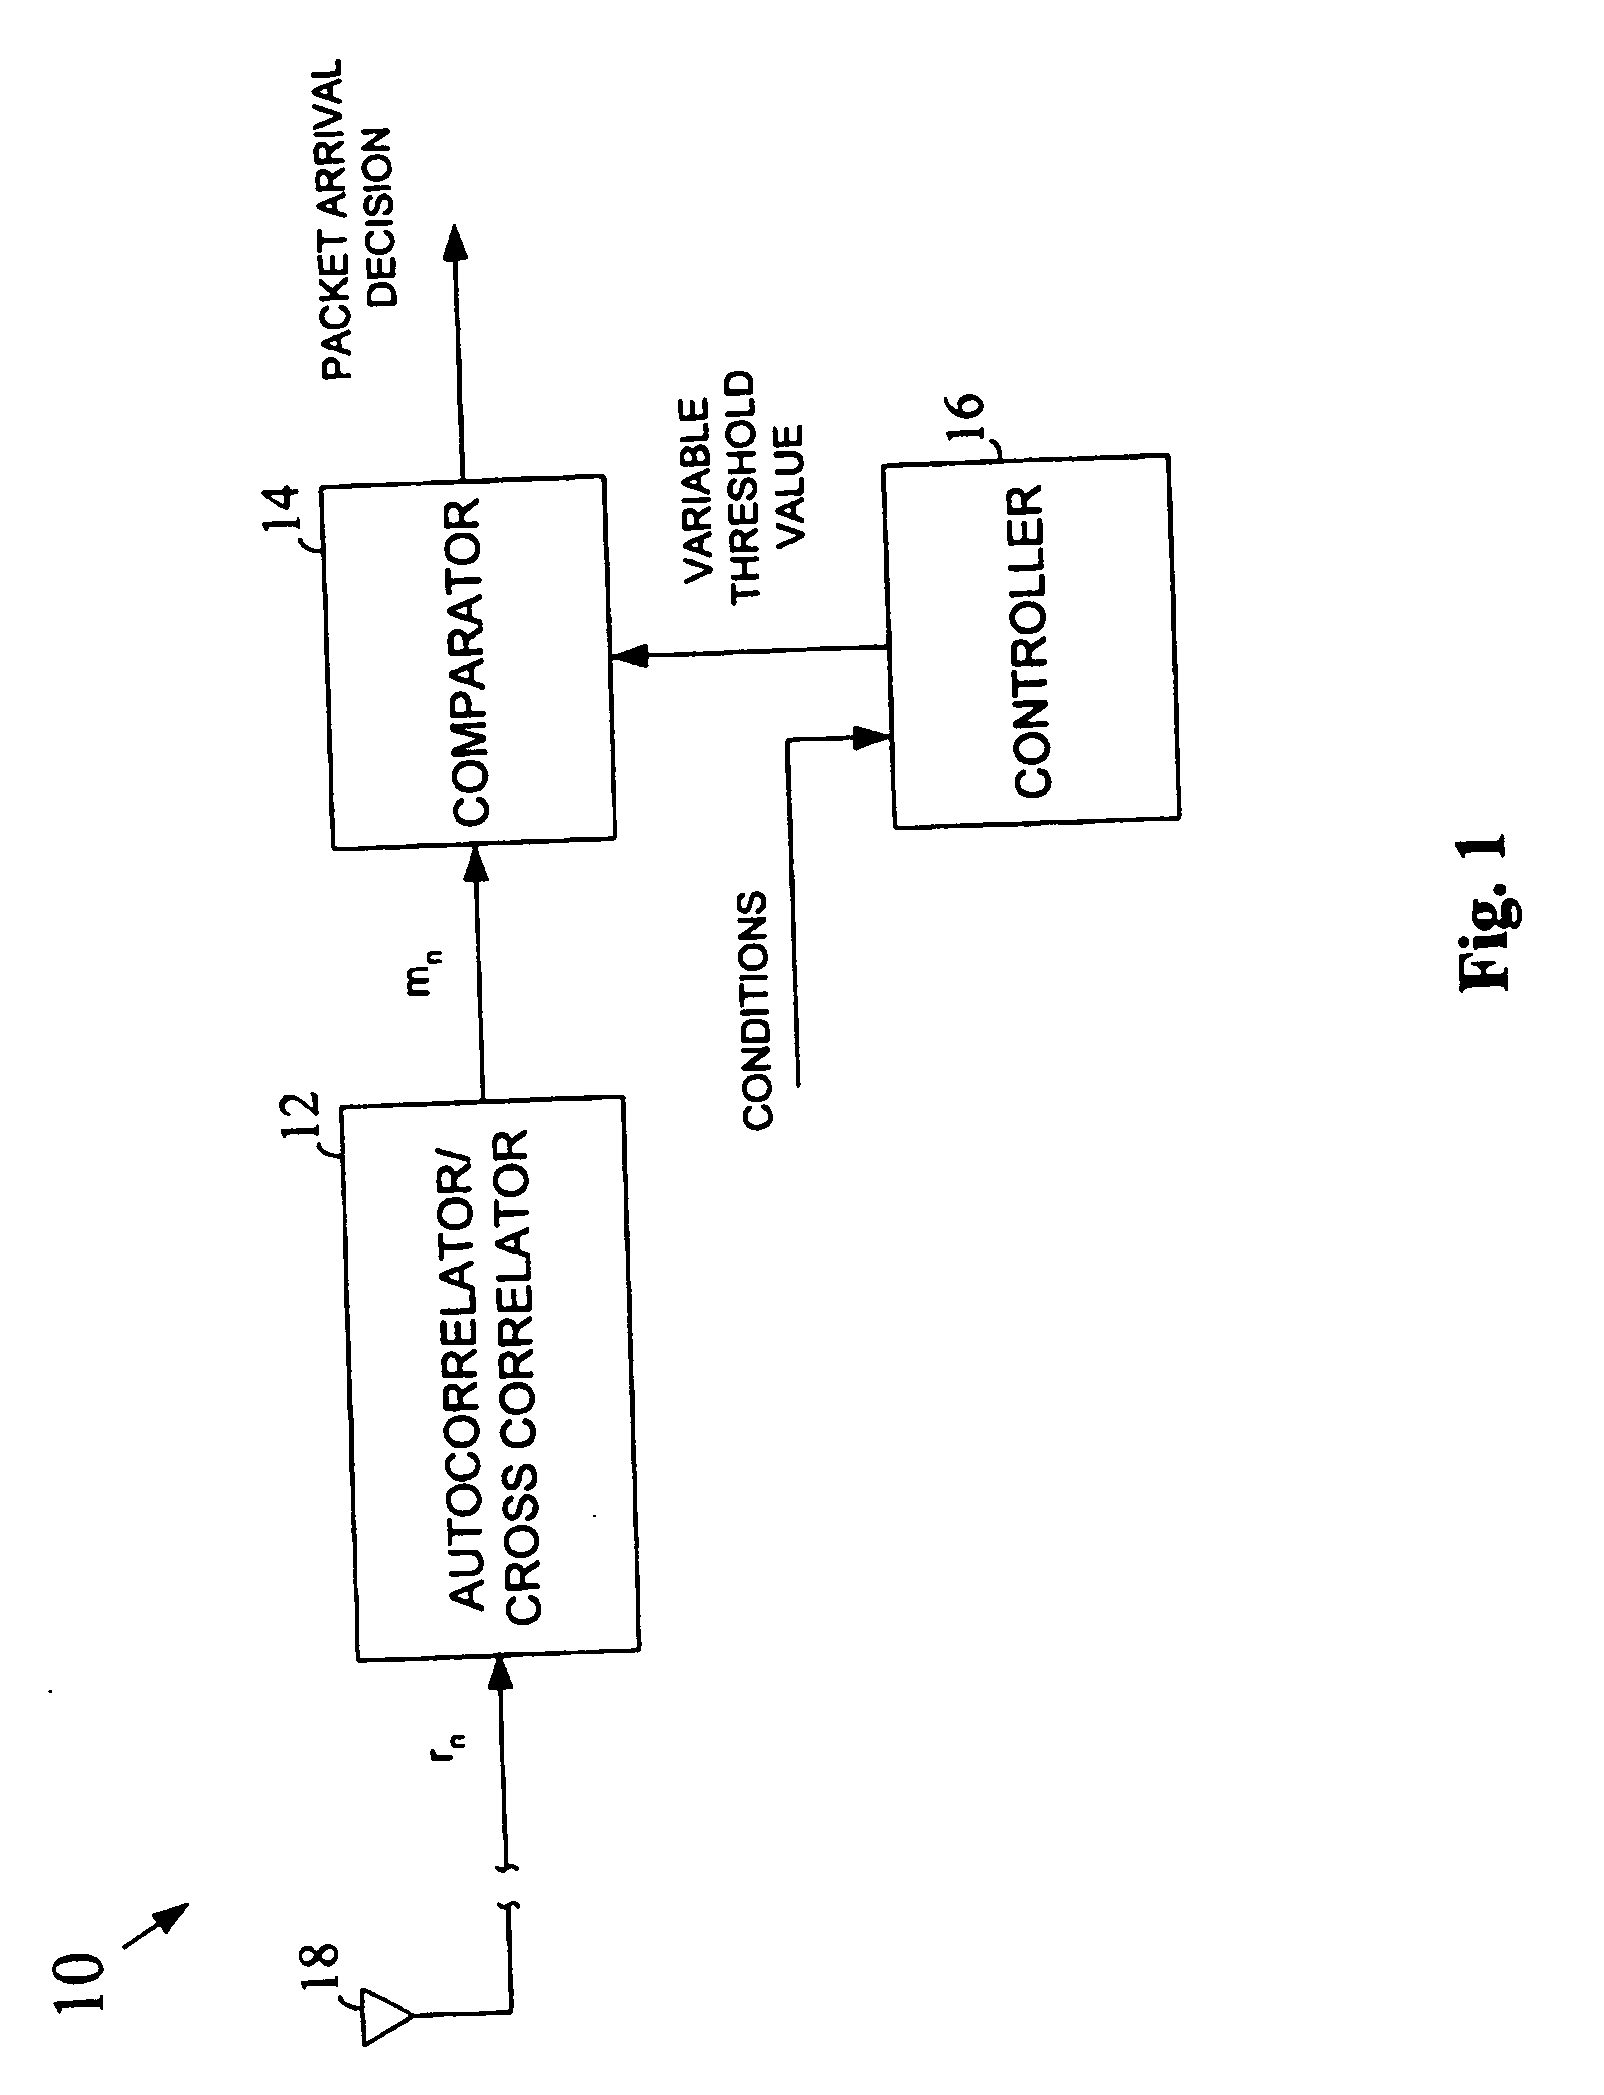 Packet detection in the presence of platform noise in a wireless network